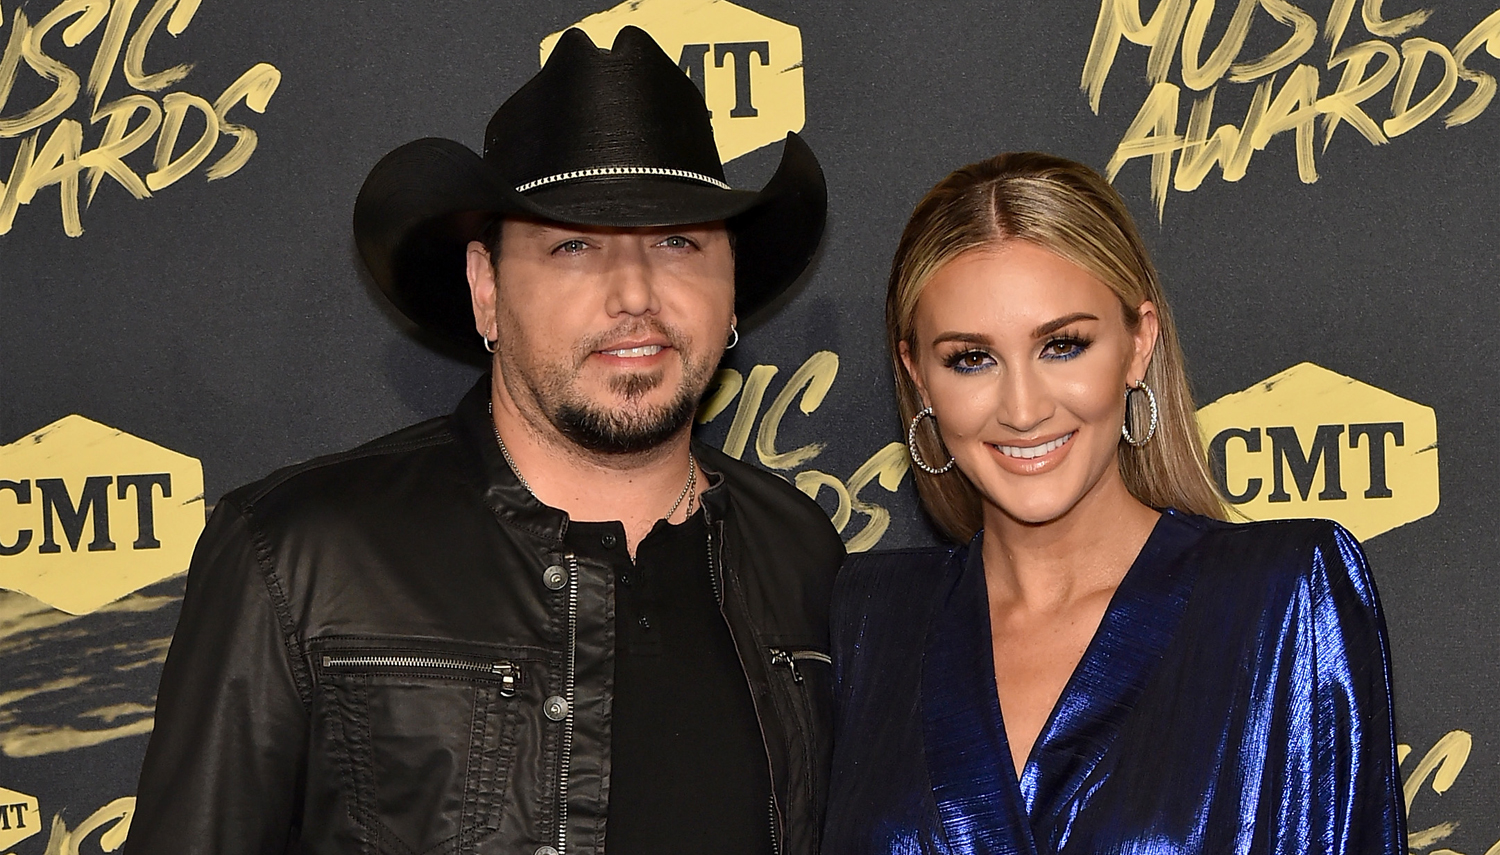 Jason Aldean & Wife Brittany Welcome Baby Girl – Find Out Her Name!...